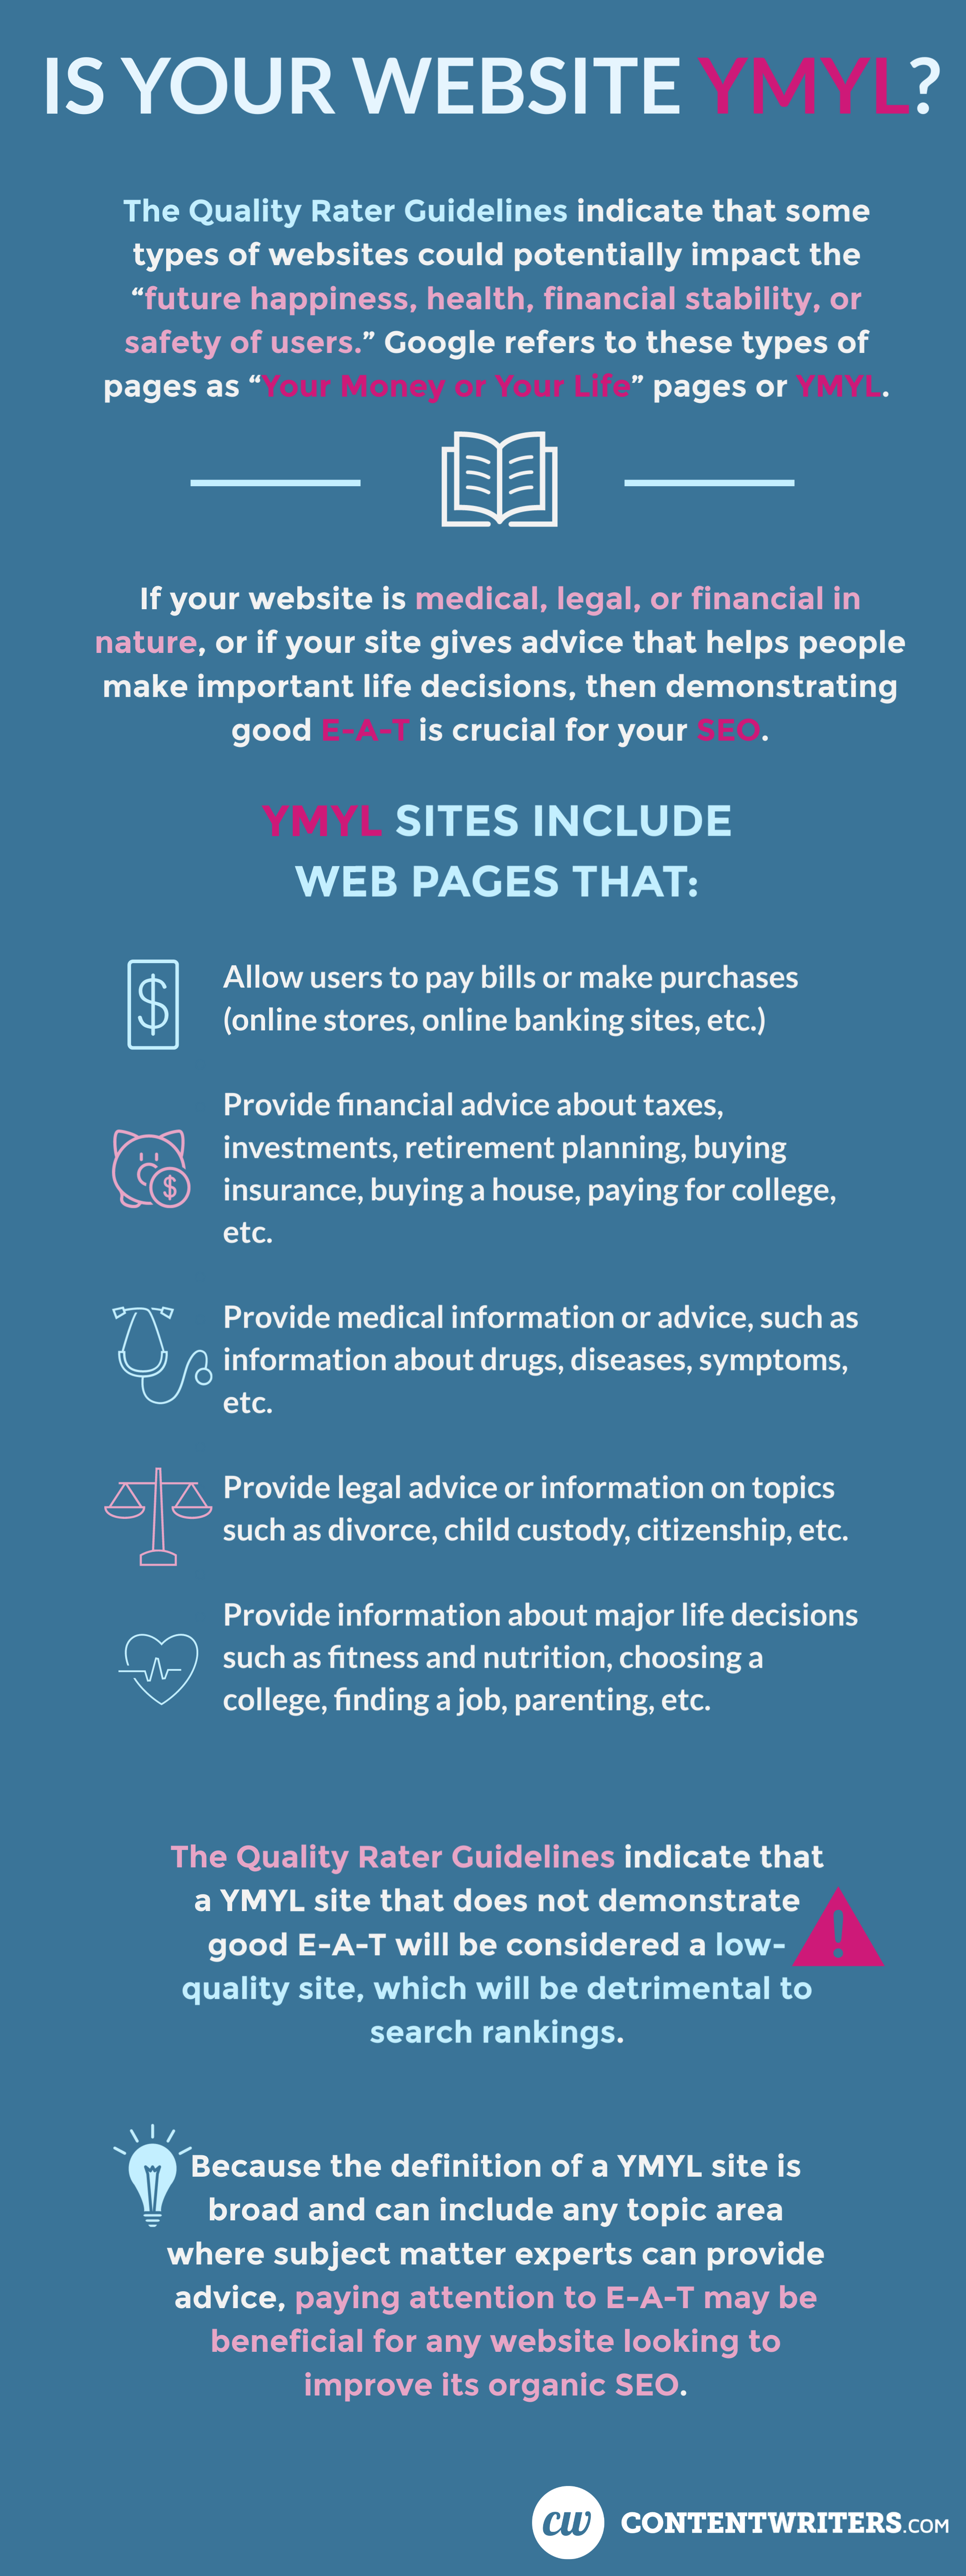 YMYL Your Money or Your Life Infographic

Is Your Website YMYL?
If your website is medical, legal, or financial in nature, or if your site gives advice that helps people make important life decisions, then demonstrating good E-A-T is crucial for your SEO.

YMYL sites include web pages that:

Allow users to pay bills or make purchases (online stores, online banking sites, etc.)
Provide financial advice about taxes, investments, retirement planning, buying insurance, buying a house, paying for college, etc.
Provide medical information or advice, such as information about drugs, diseases, symptoms, etc.
Provide legal advice or information on topics such as divorce, child custody, citizenship, etc.
Provide information about major life decisions such as fitness and nutrition, choosing a college, finding a job, parenting, etc.
The Quality Rater Guidelines indicate that a YMYL site that does not demonstrate good E-A-T will be considered a low-quality site, which will be detrimental to search rankings.

Because the definition of a YMYL site is broad and can include any topic area where subject matter experts can provide advice, paying attention to E-A-T may be beneficial for any website looking to improve its organic SEO.

ContentWriters